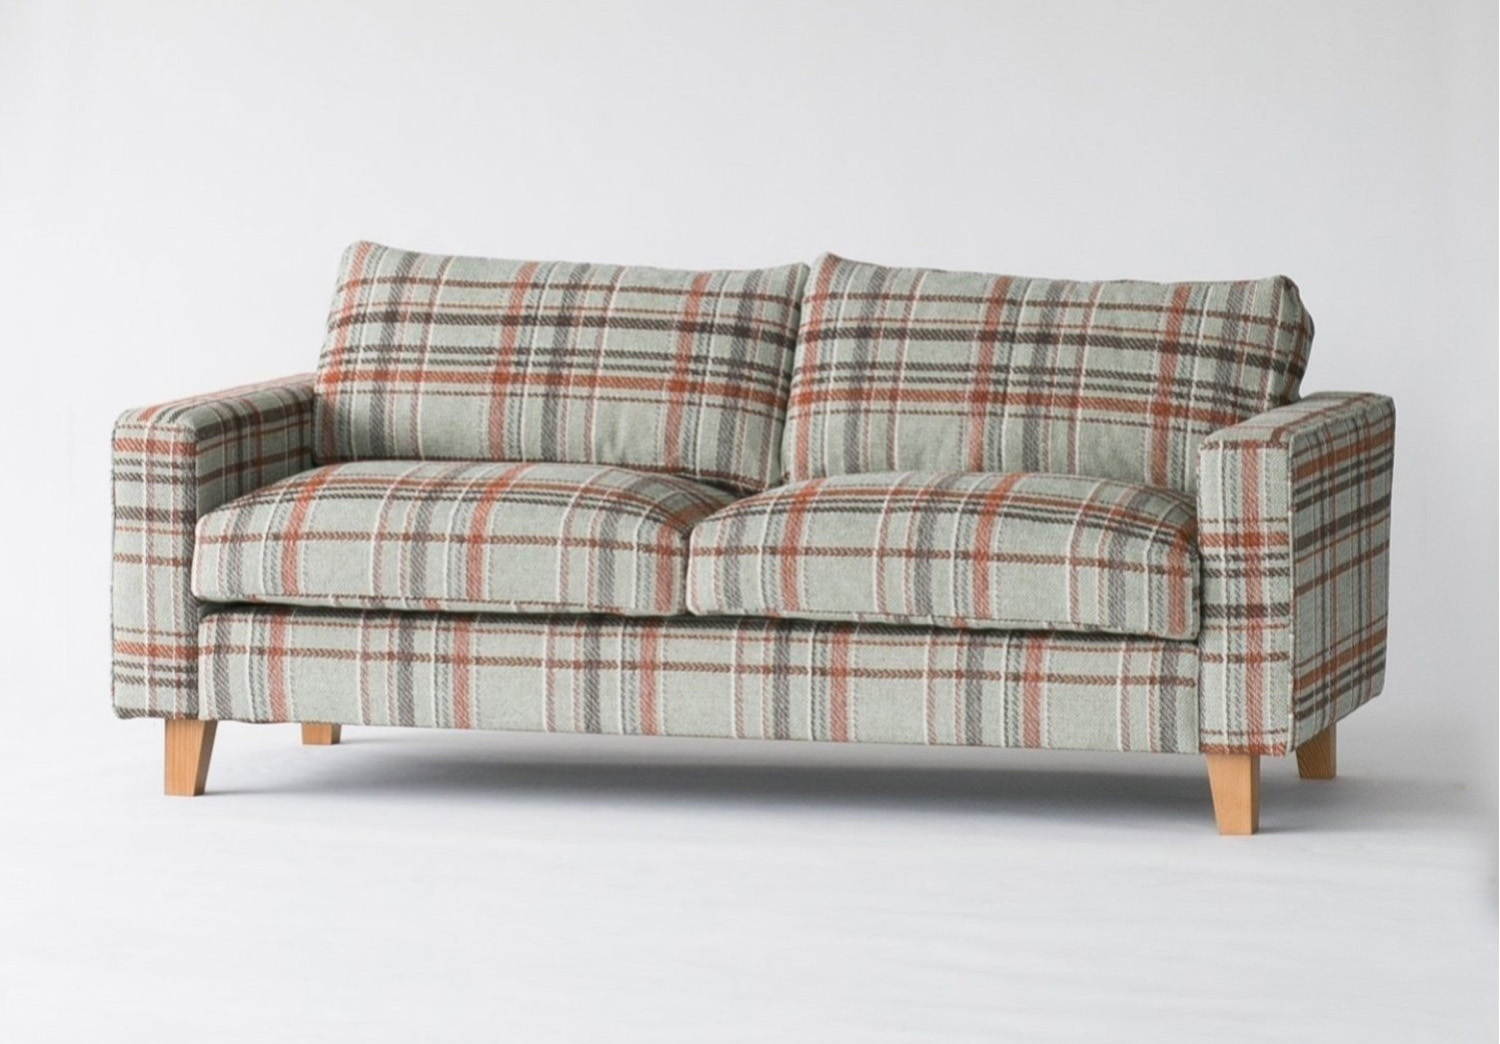 ACME Furniture アクメファニチャー JETTY feather SOFA 2.5 